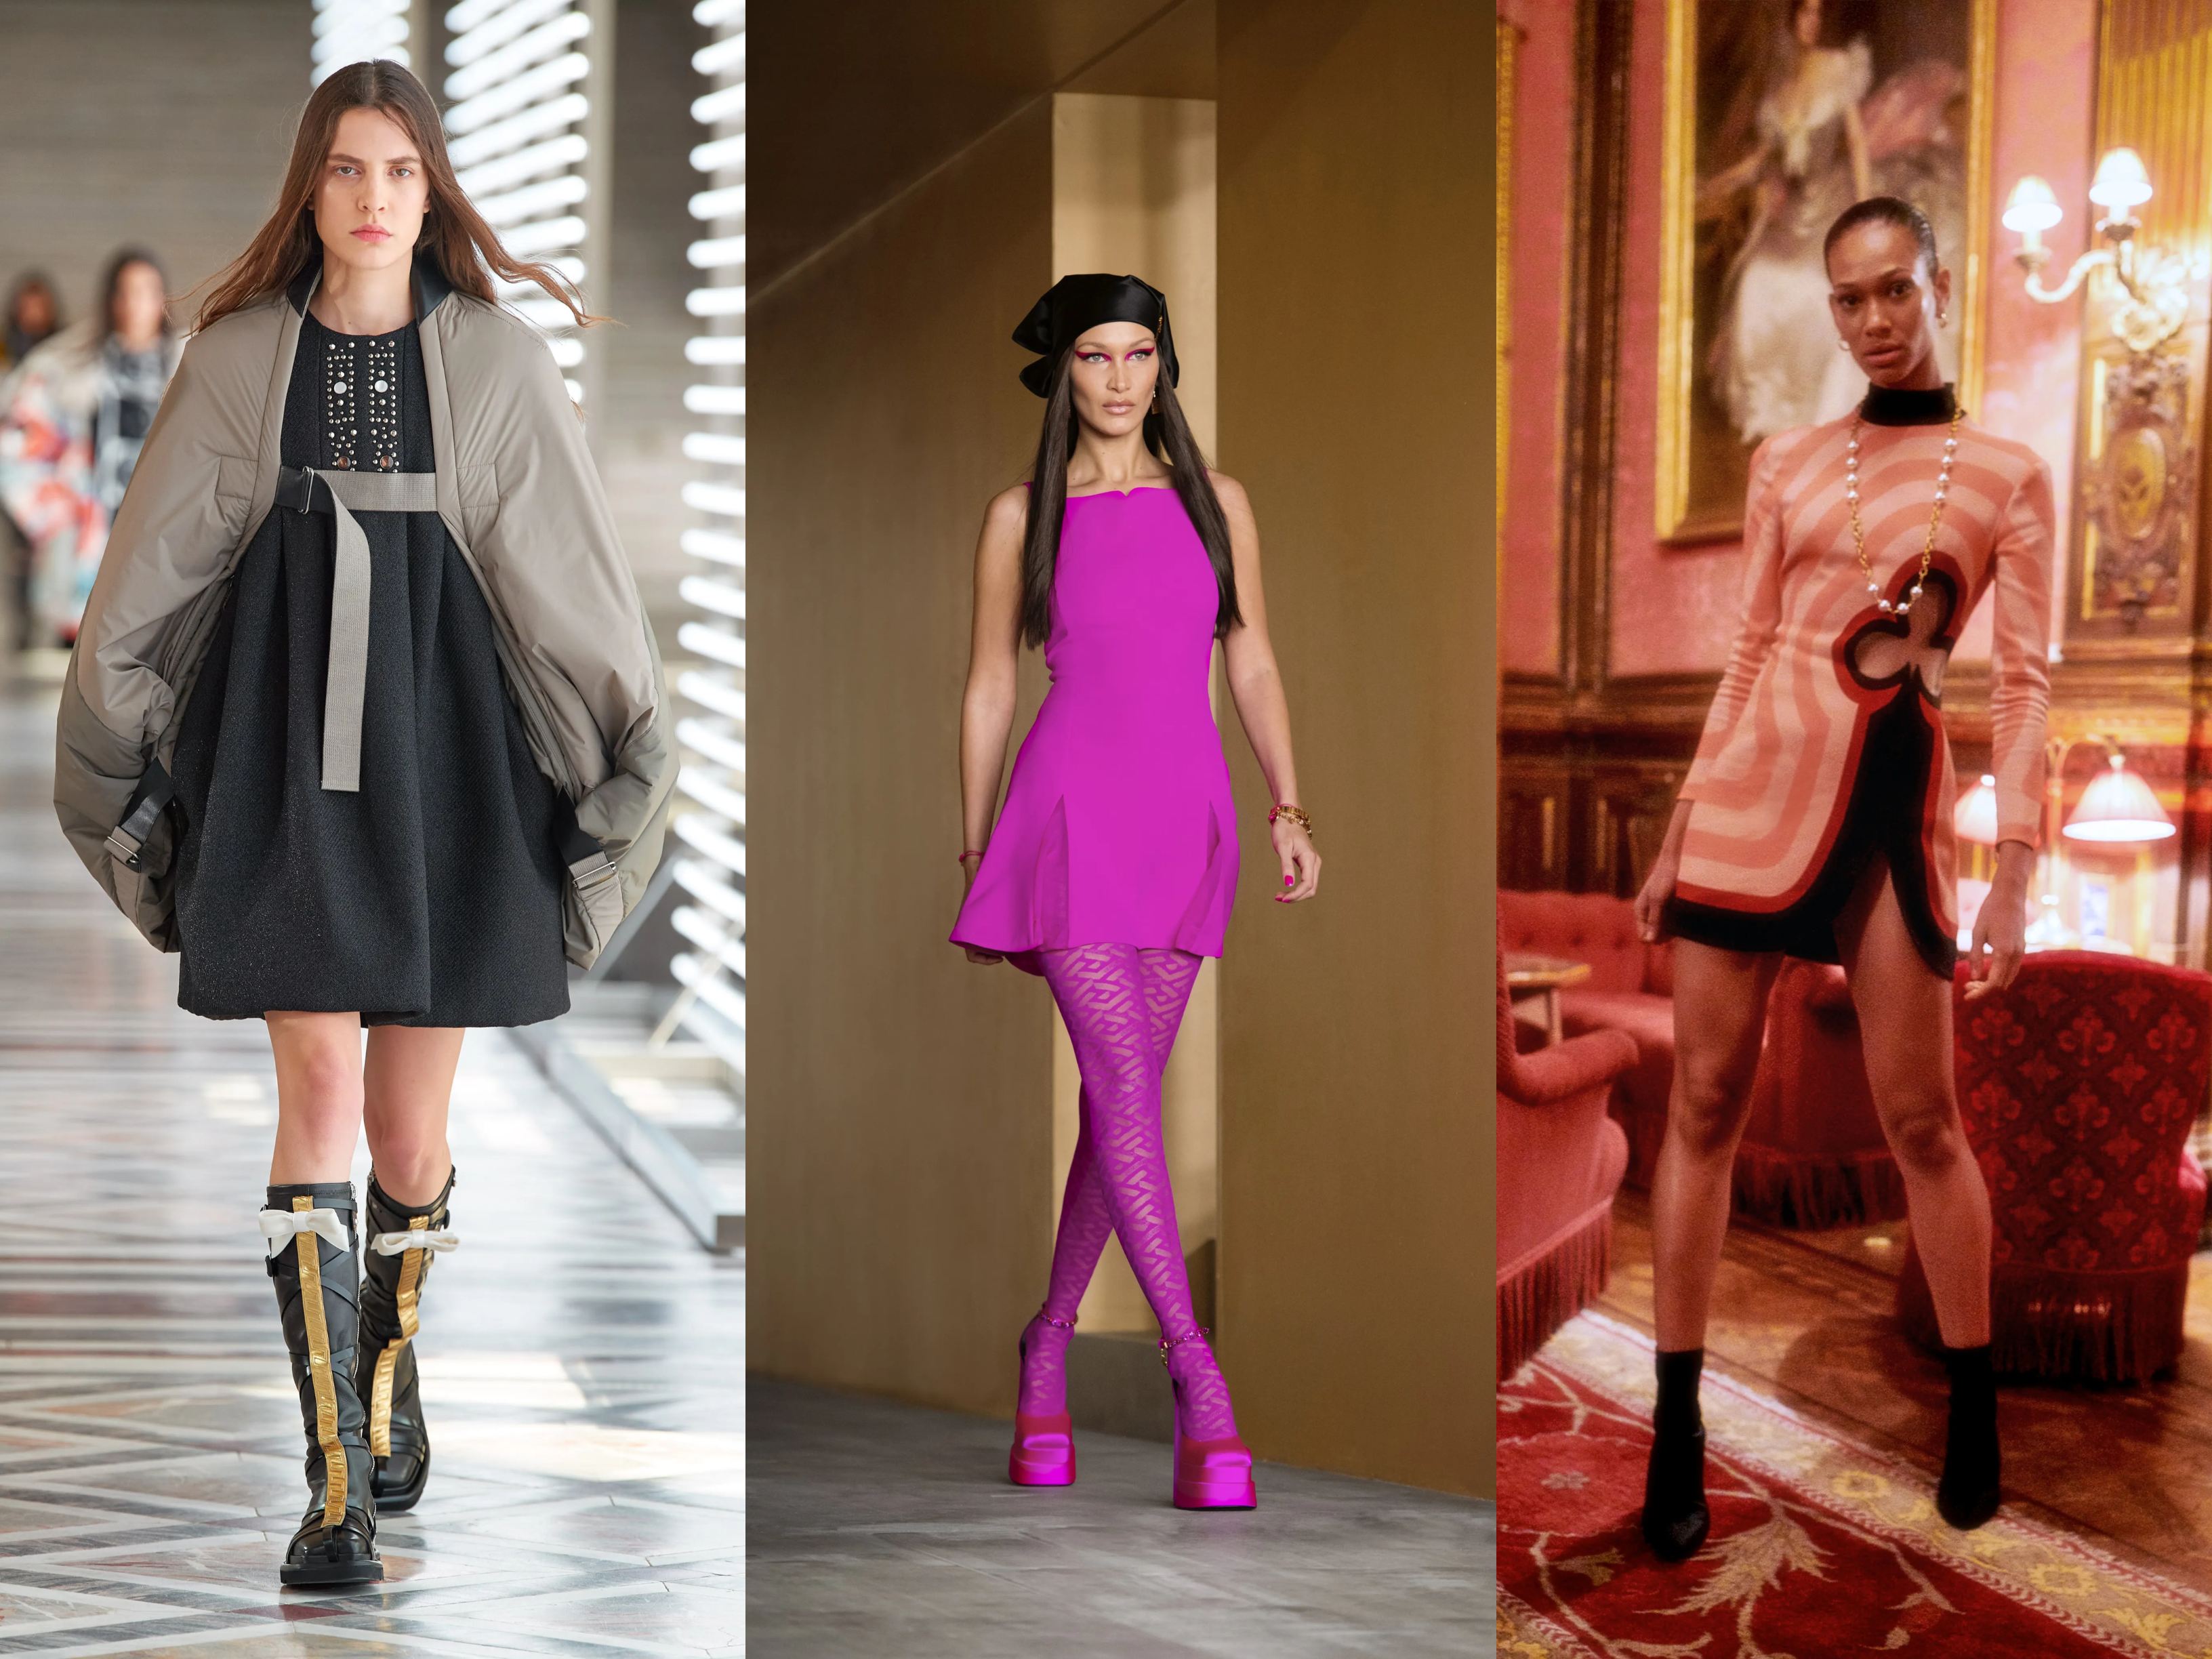 Models wearing AW21 trends Mini skirts and dresses